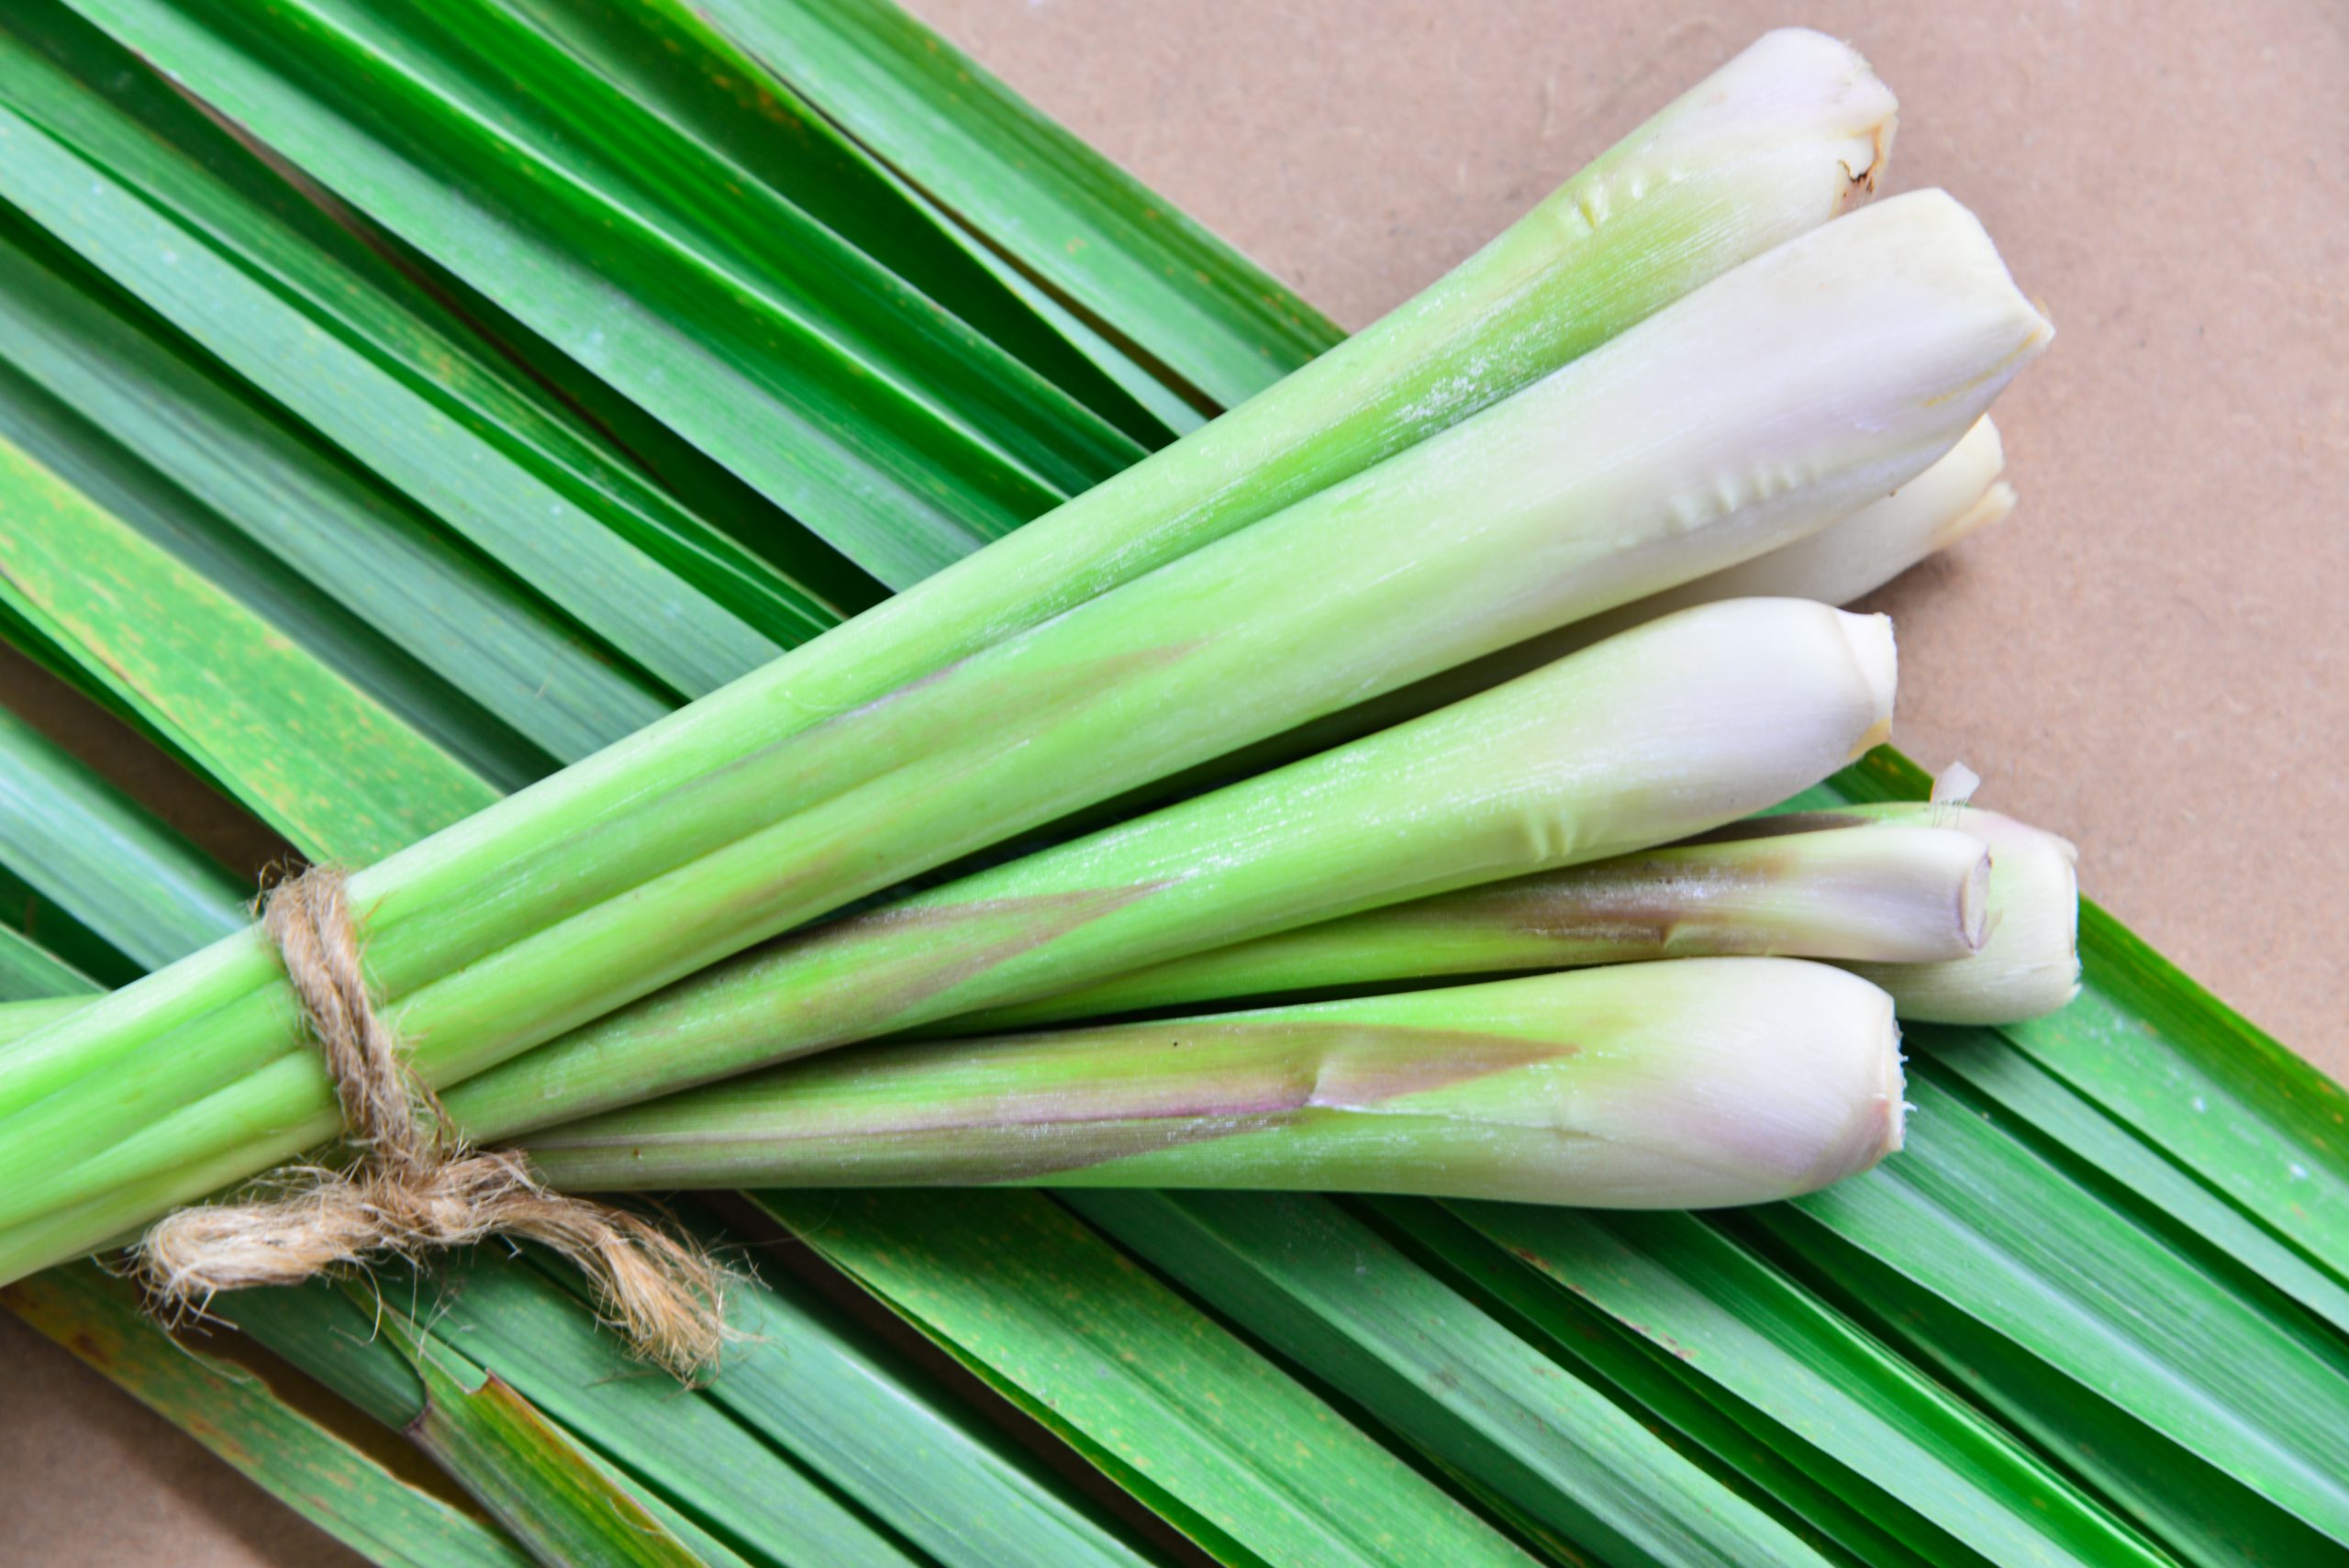 VIDEO: Research Support on the Use of Lemongrass for Hair Health